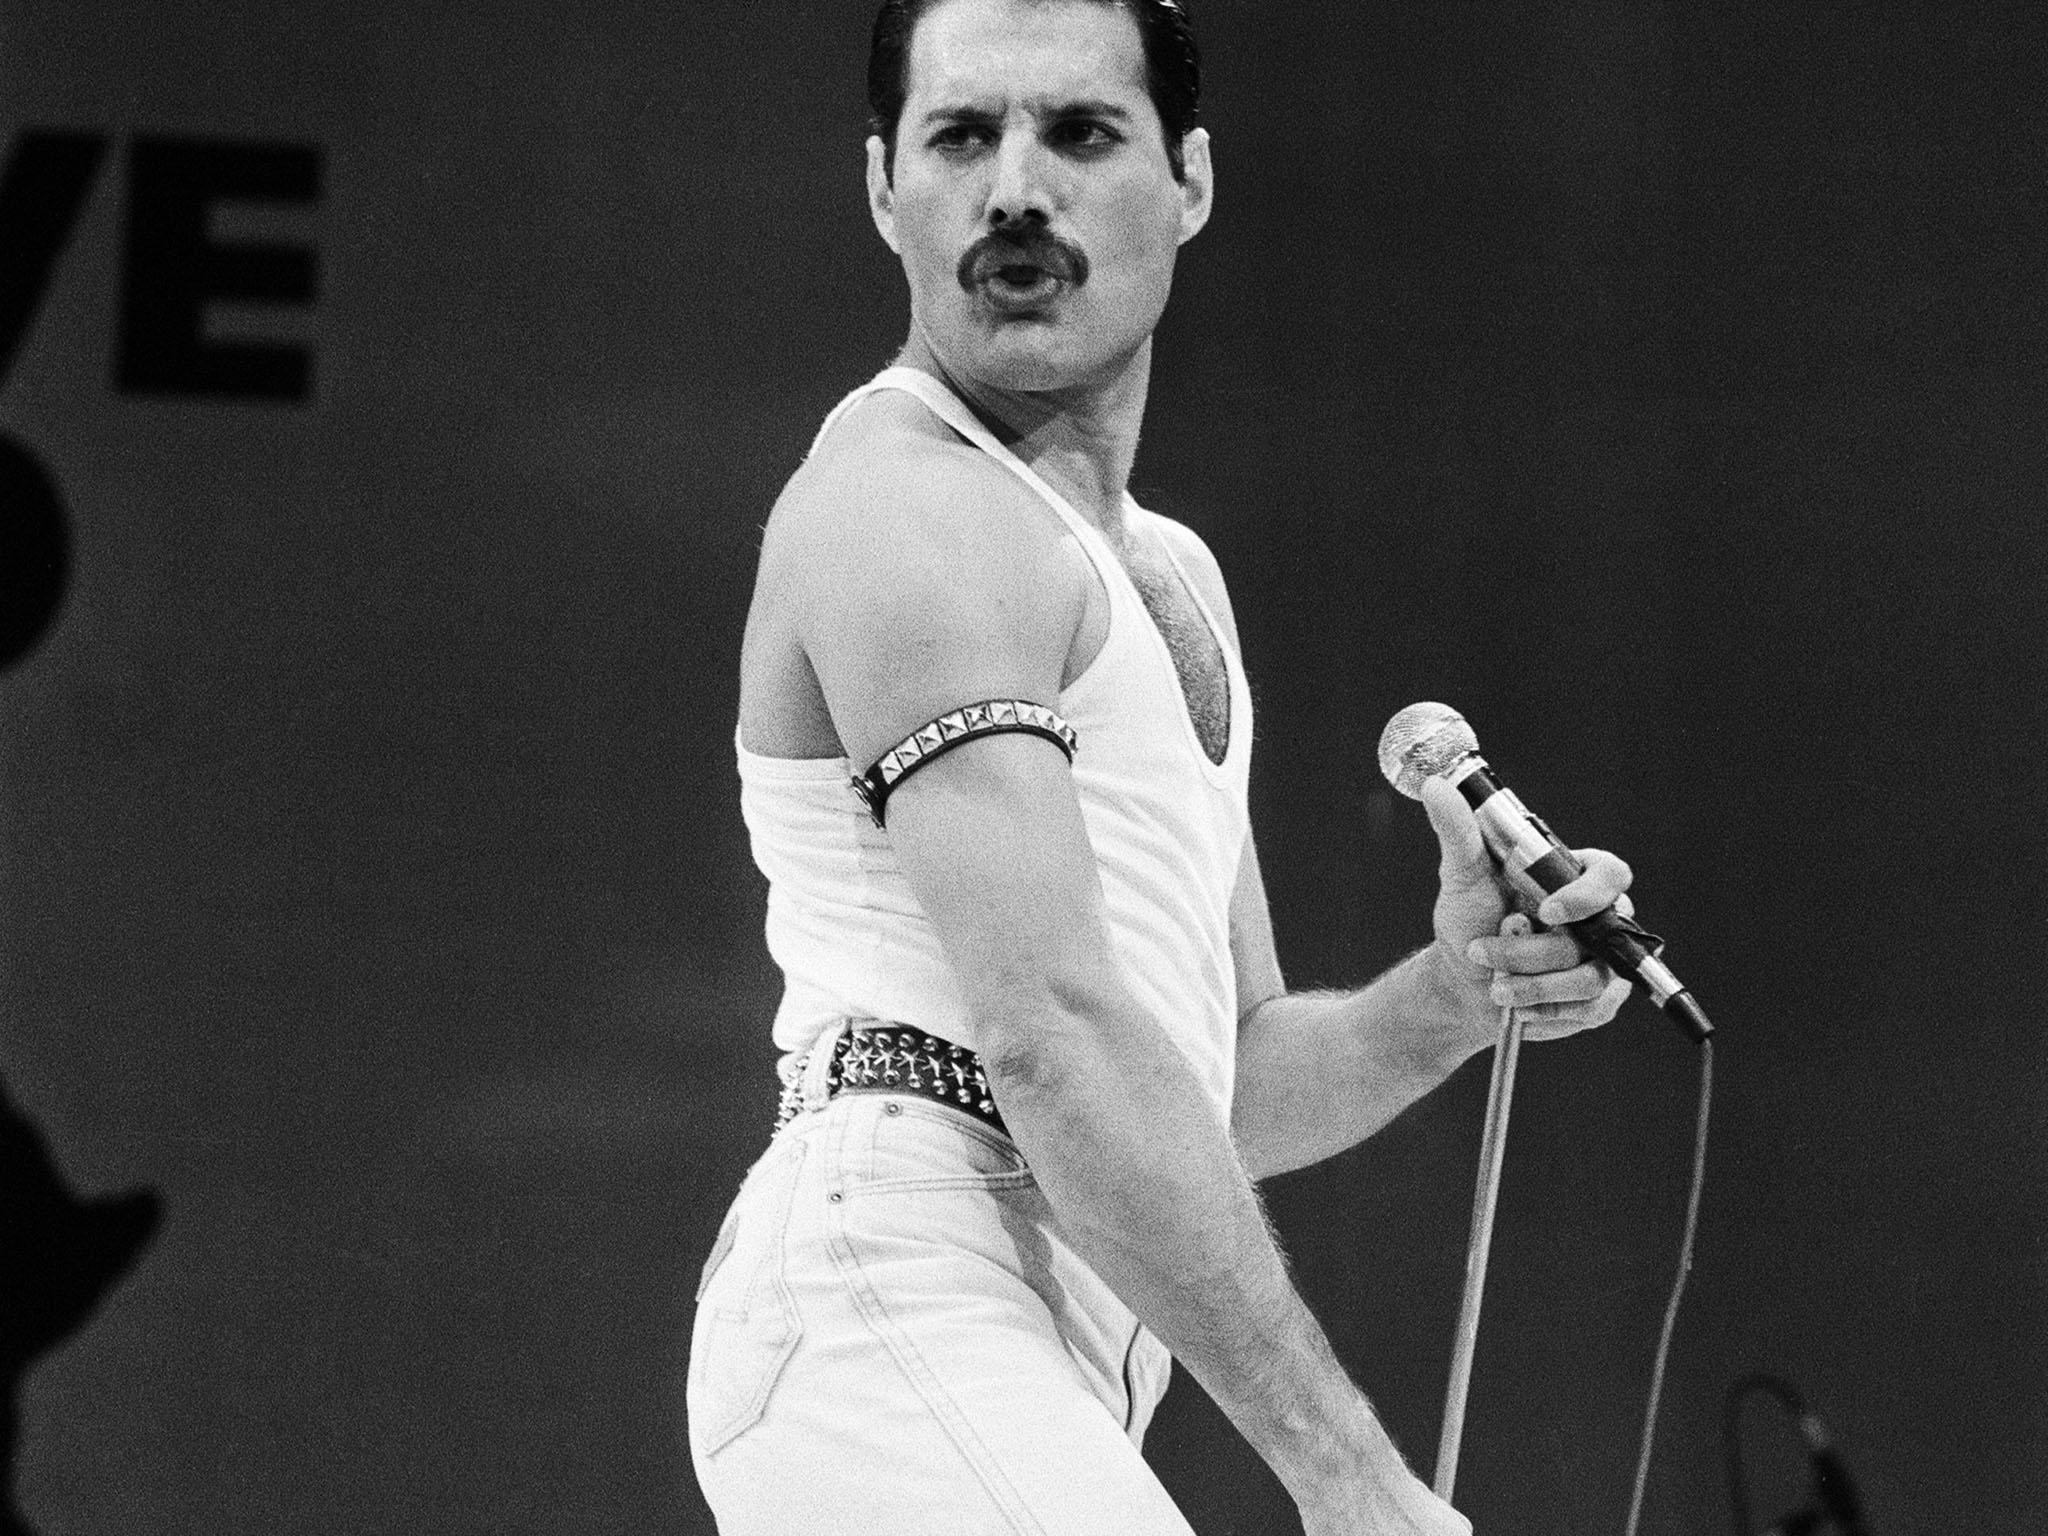 4. Queen at Live Aid (1985)